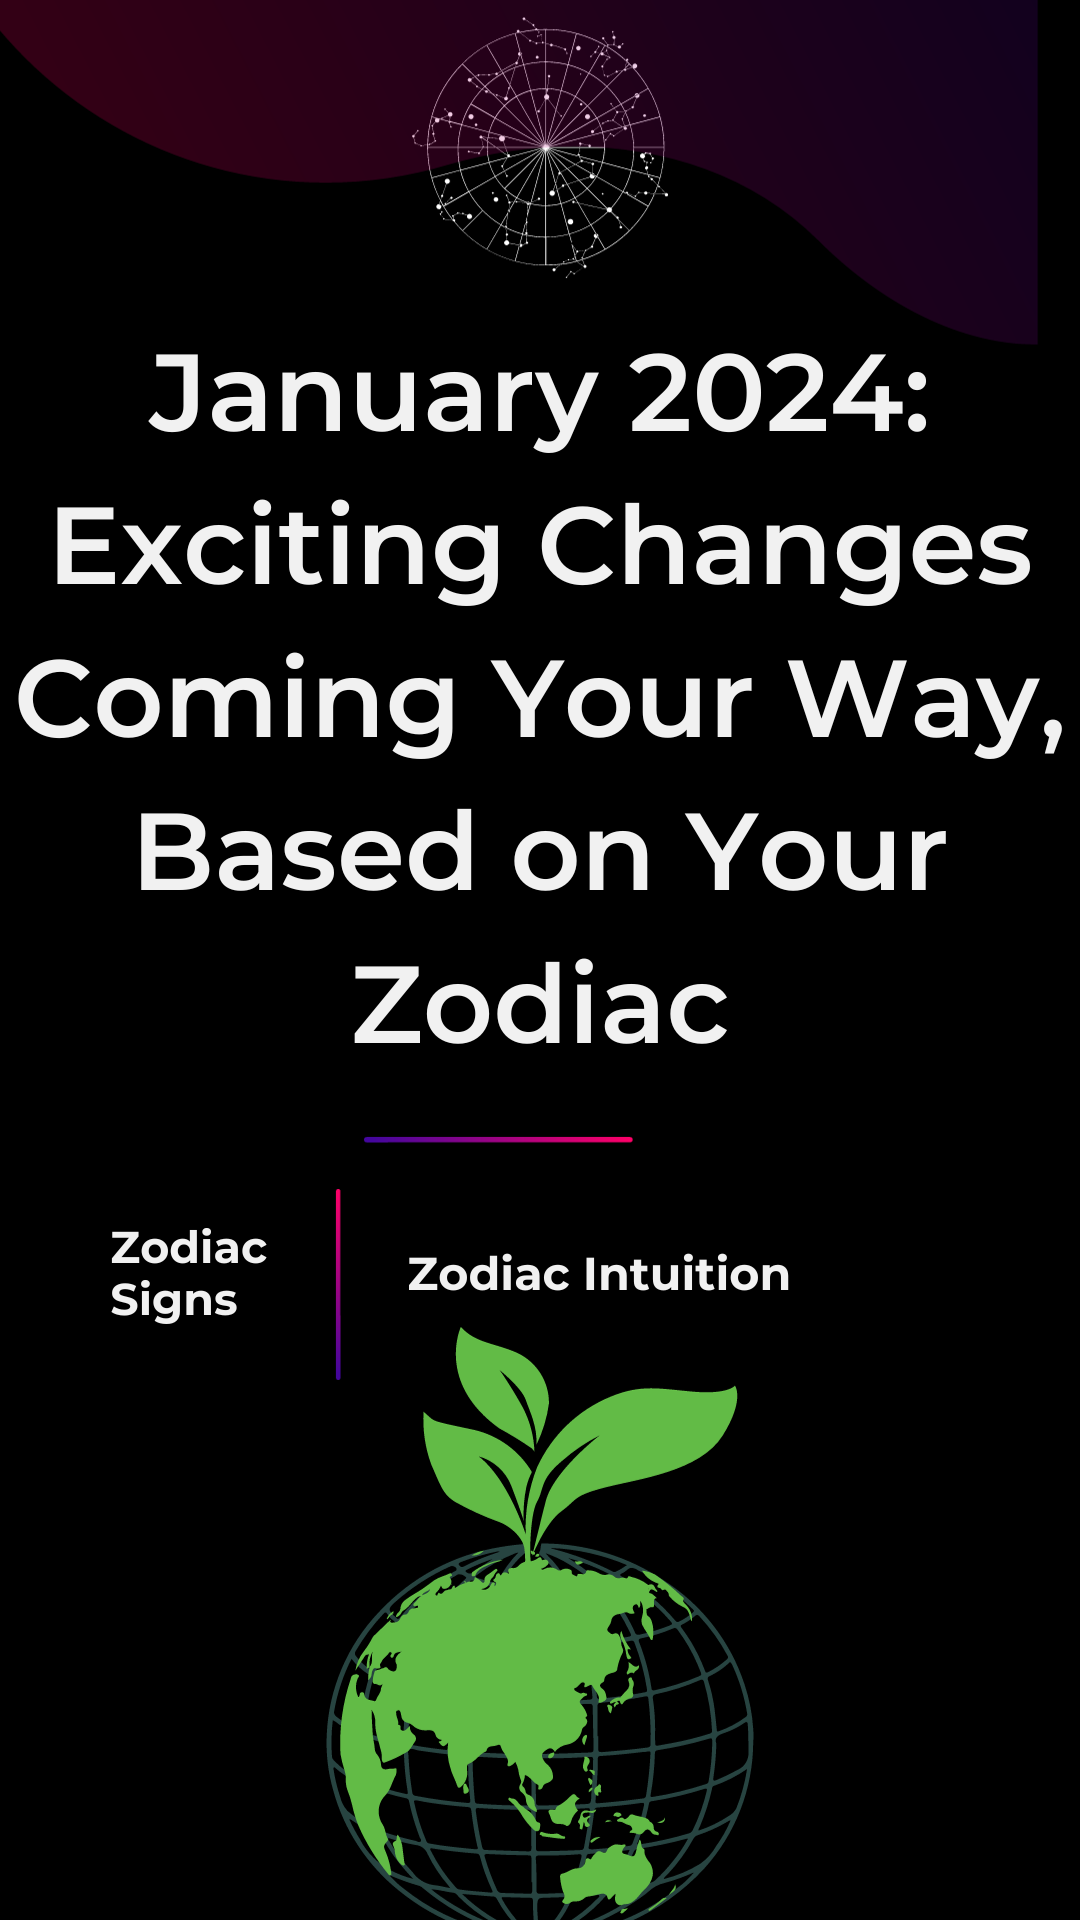 January 2024: Exciting Changes Coming Your Way, Based on Your Zodiac